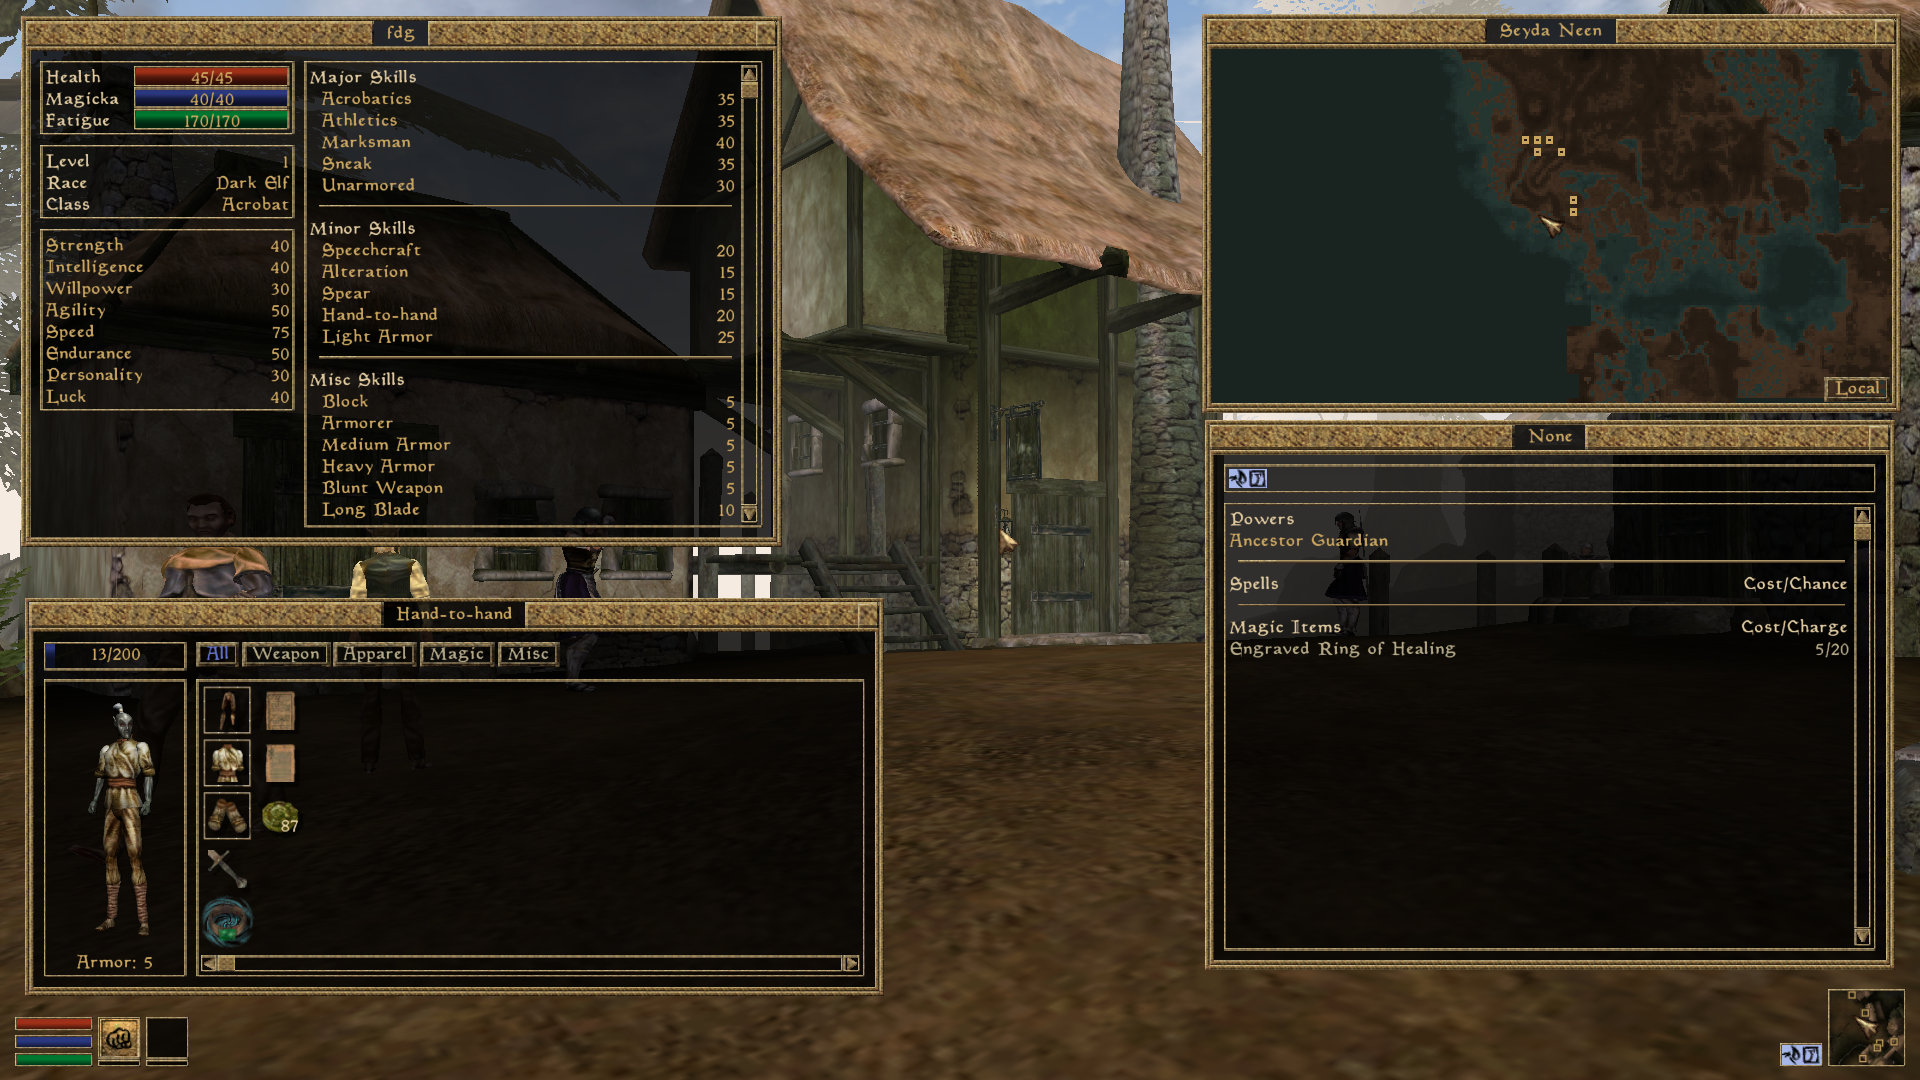 unofficial morrowind patch vs. morrowind code patch